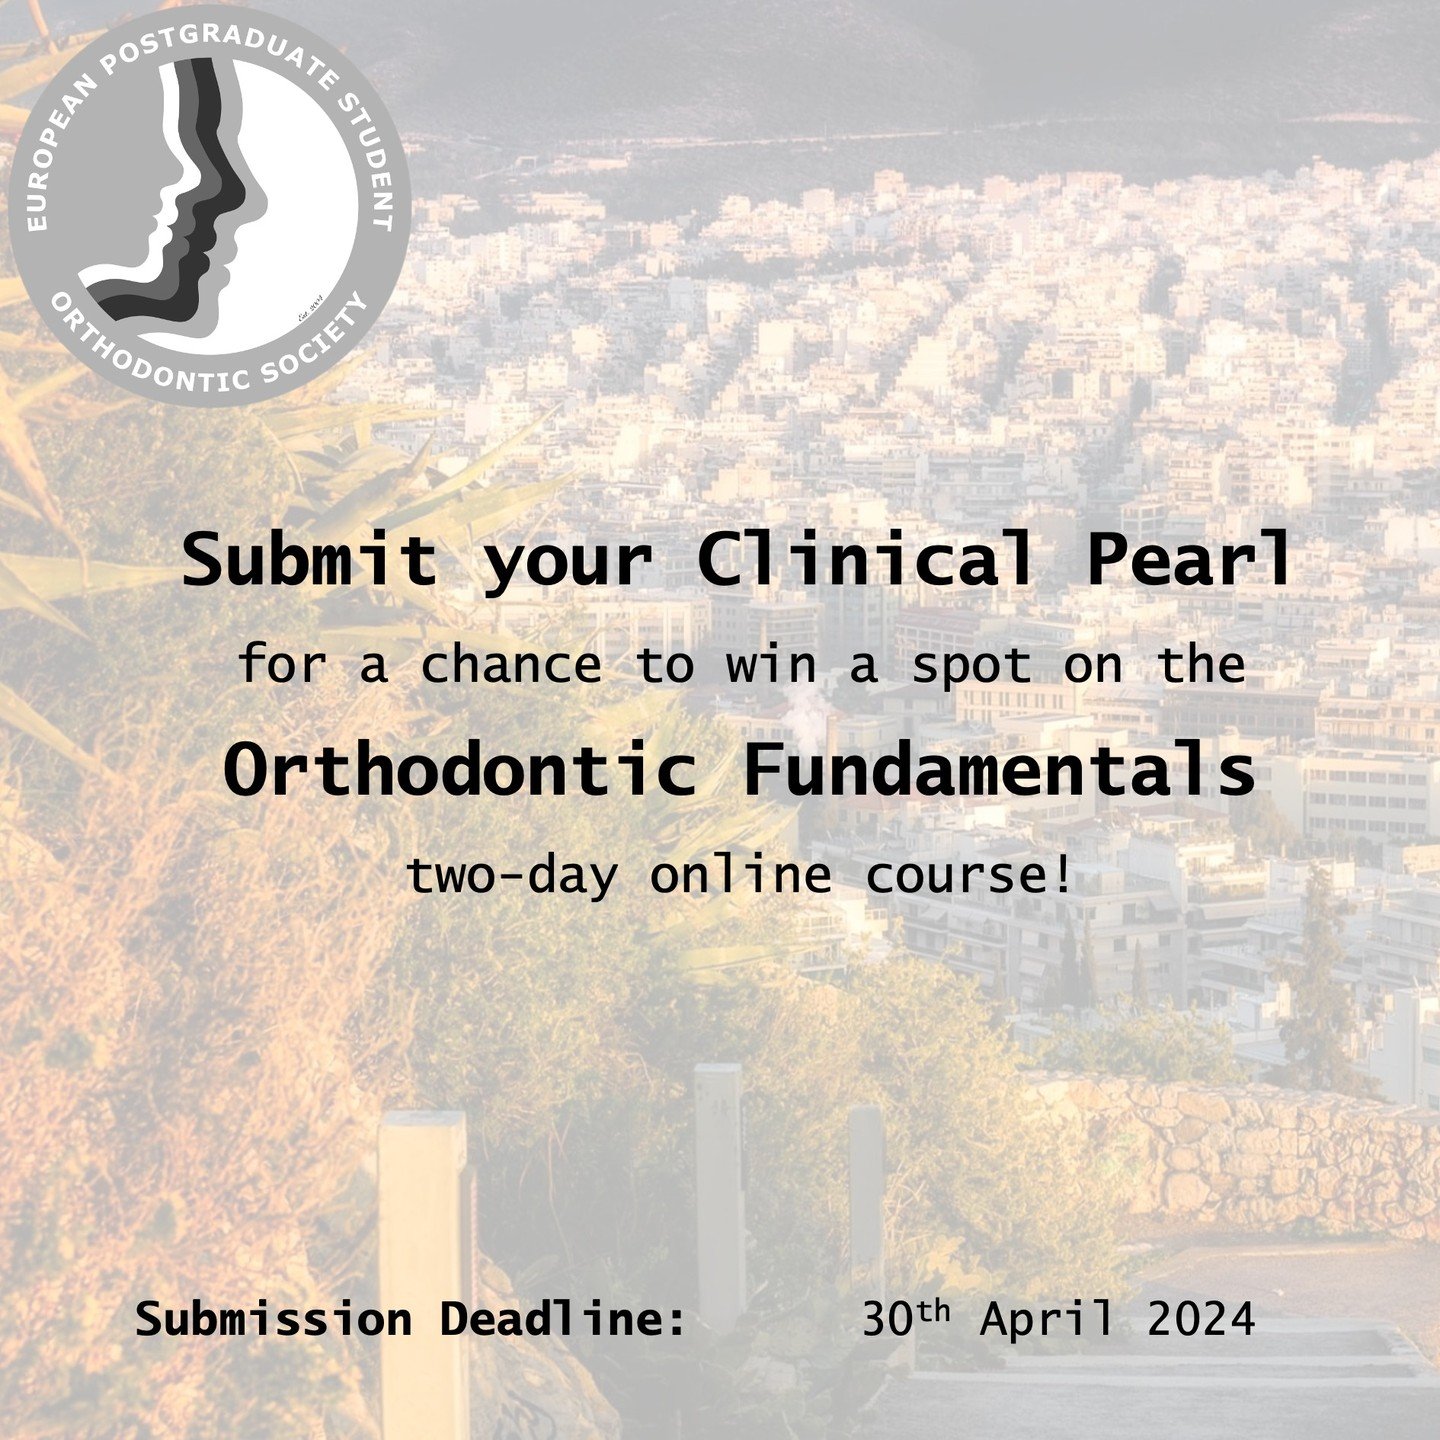 REMINDER: We are accepting submissions for clinical pearls to be presented at the event. The deadline for submissions is 30th April 2024, 23:59&nbsp;Central European Time (CET).

In collaboration with Orthodontic Fundamentals, the Padhraig S. Fleming